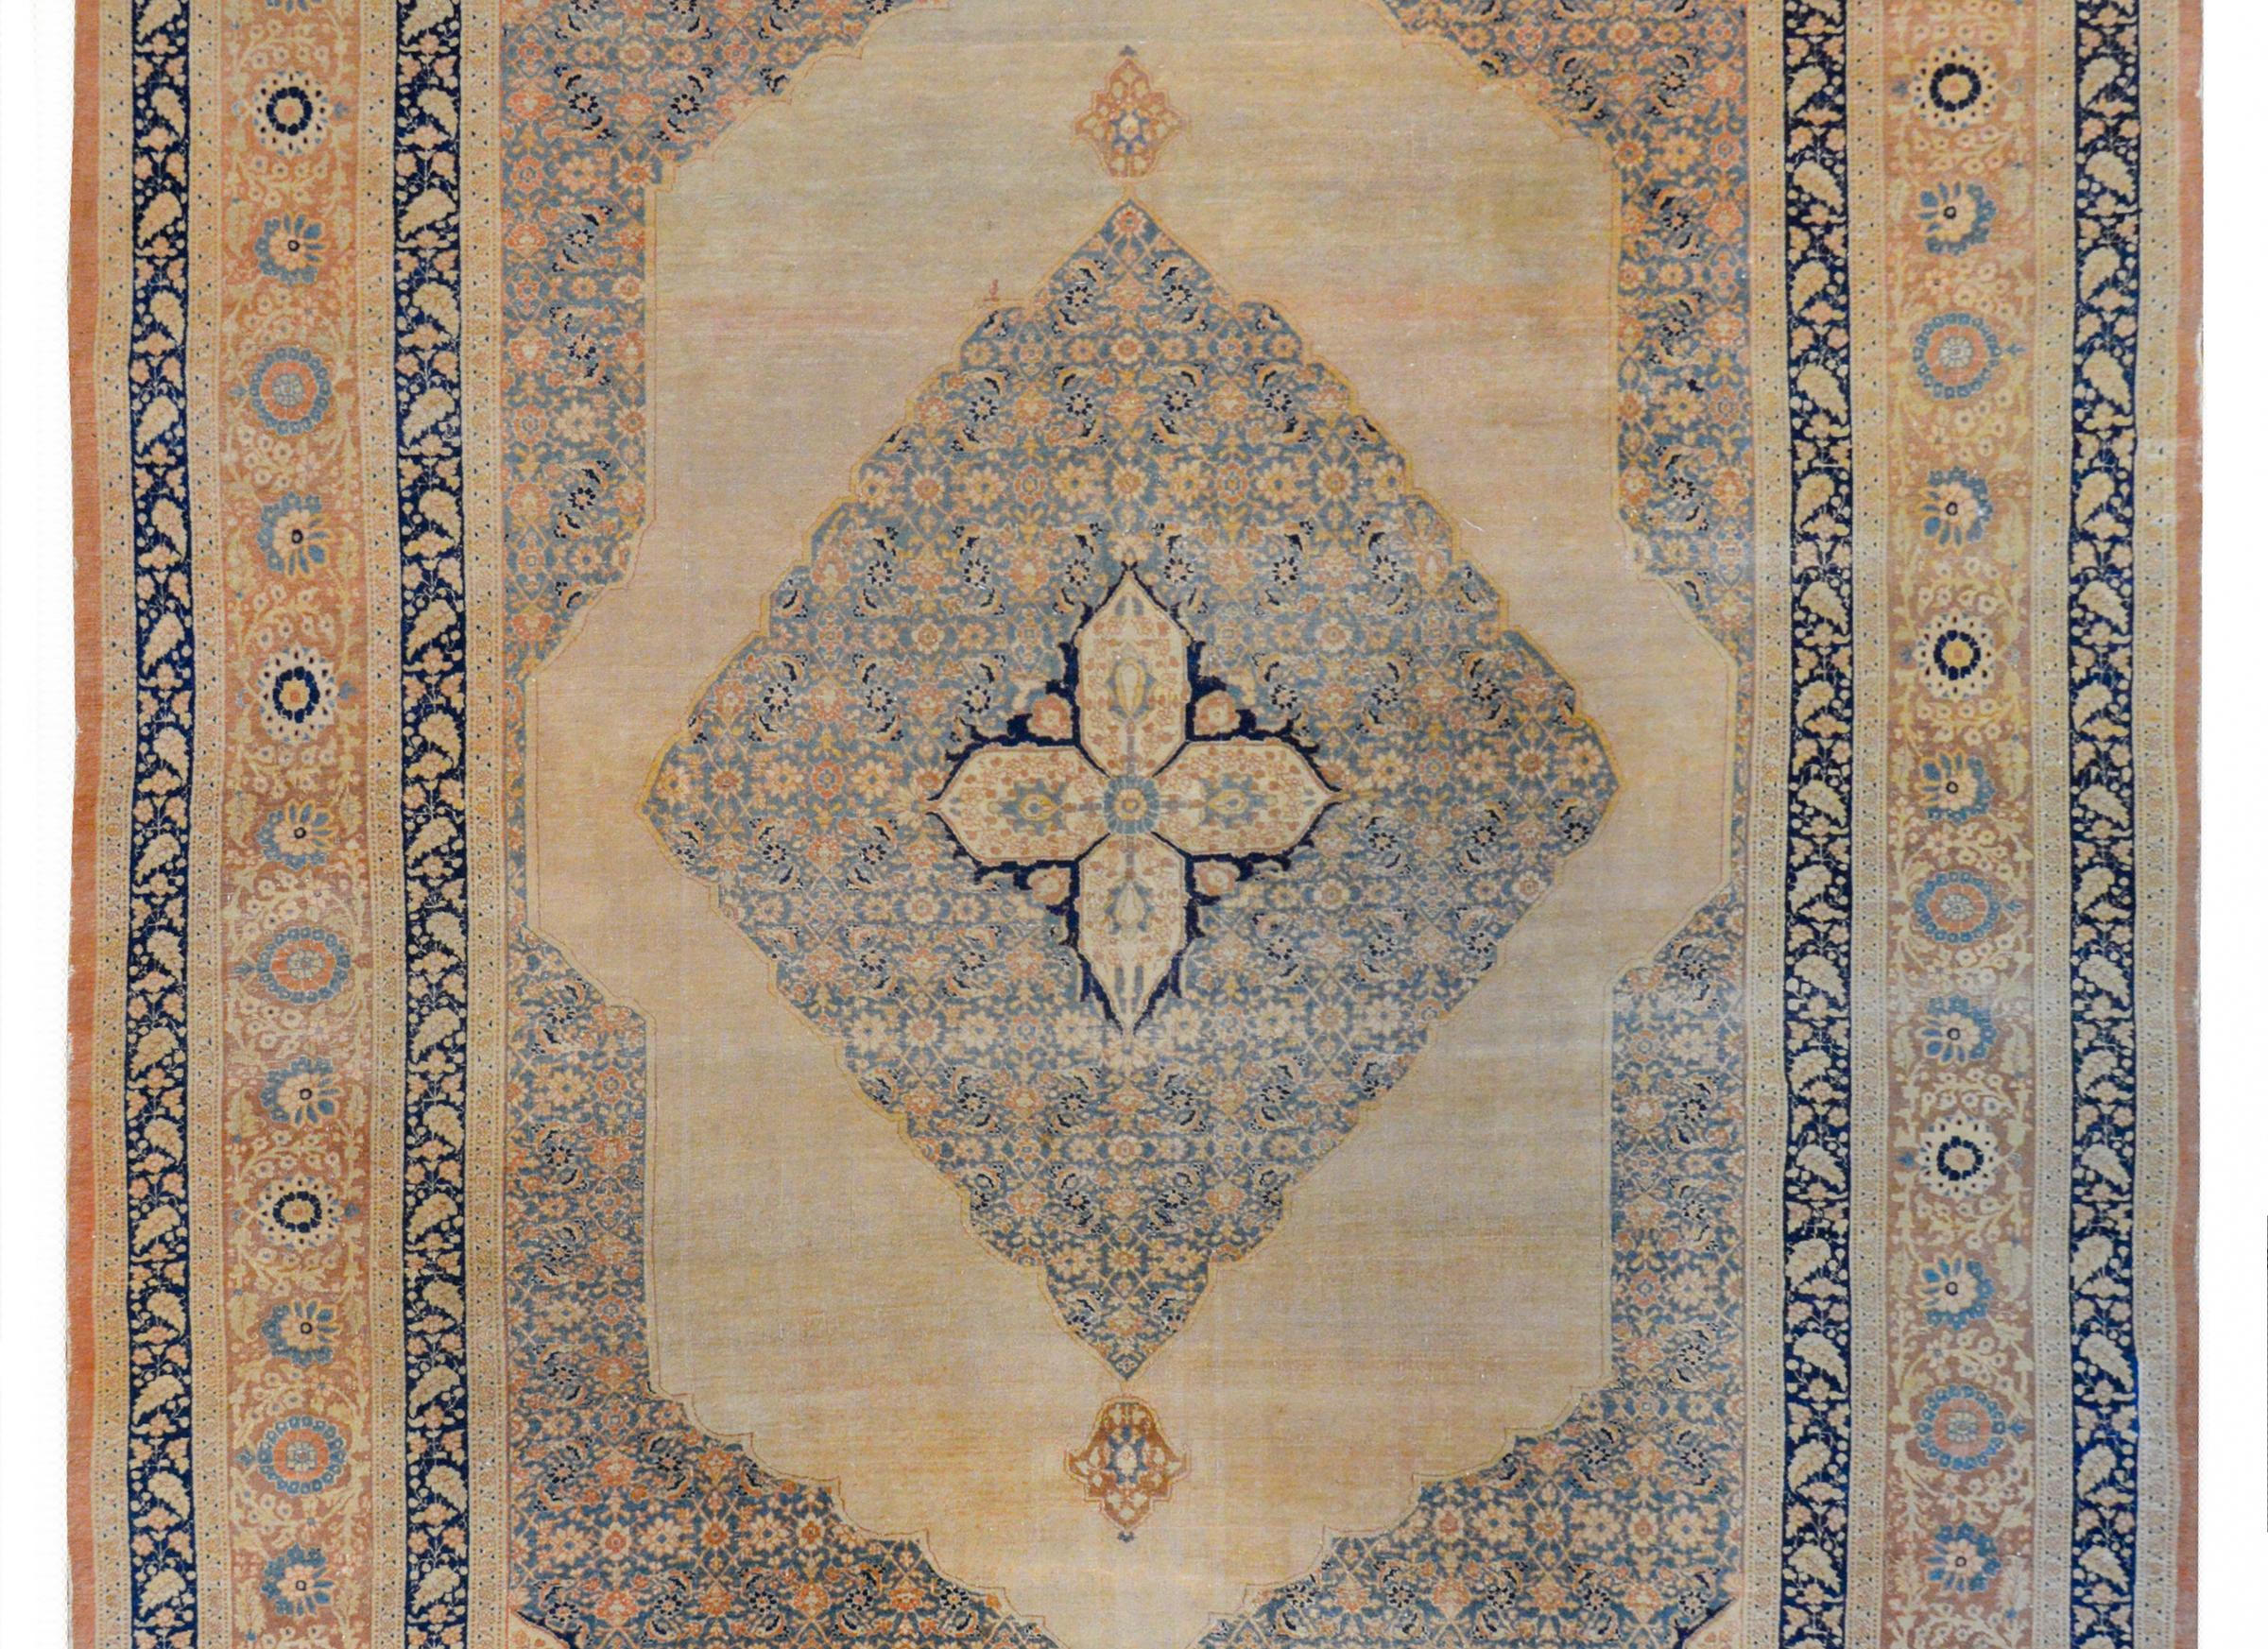 An incredible early 20th century Persian Hadji Jalili Tabriz rug with a four-lobed medallion on a larger diamond medallion with a leaf and flower trellis pattern woven in pale cream, gold, rust, and light indigo. The medallions live on an abrash